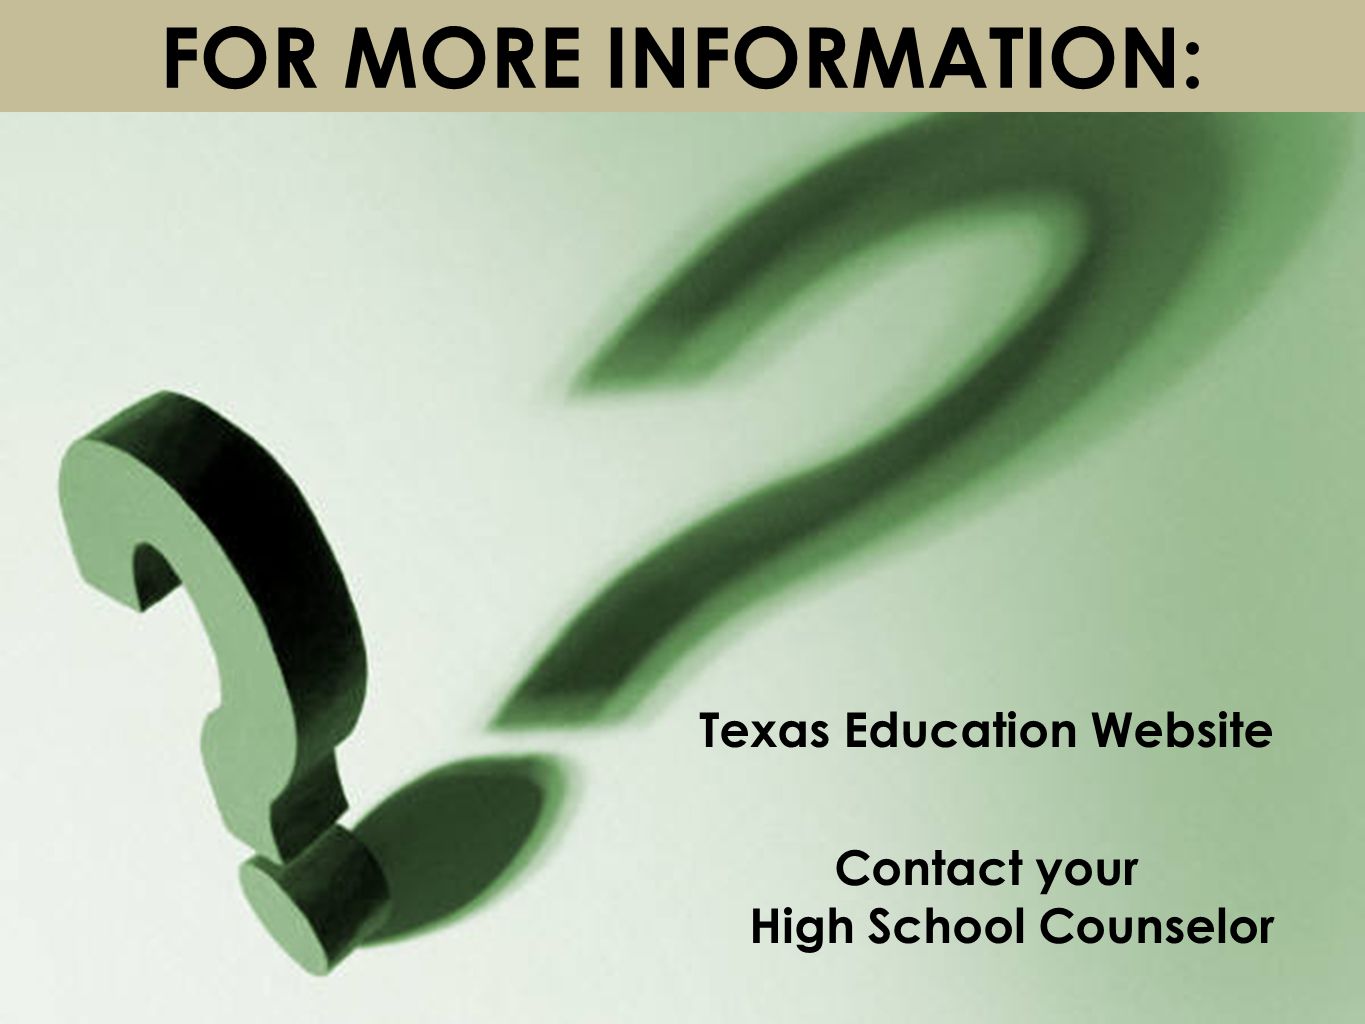 FOR MORE INFORMATION: Texas Education Website Contact your High School Counselor